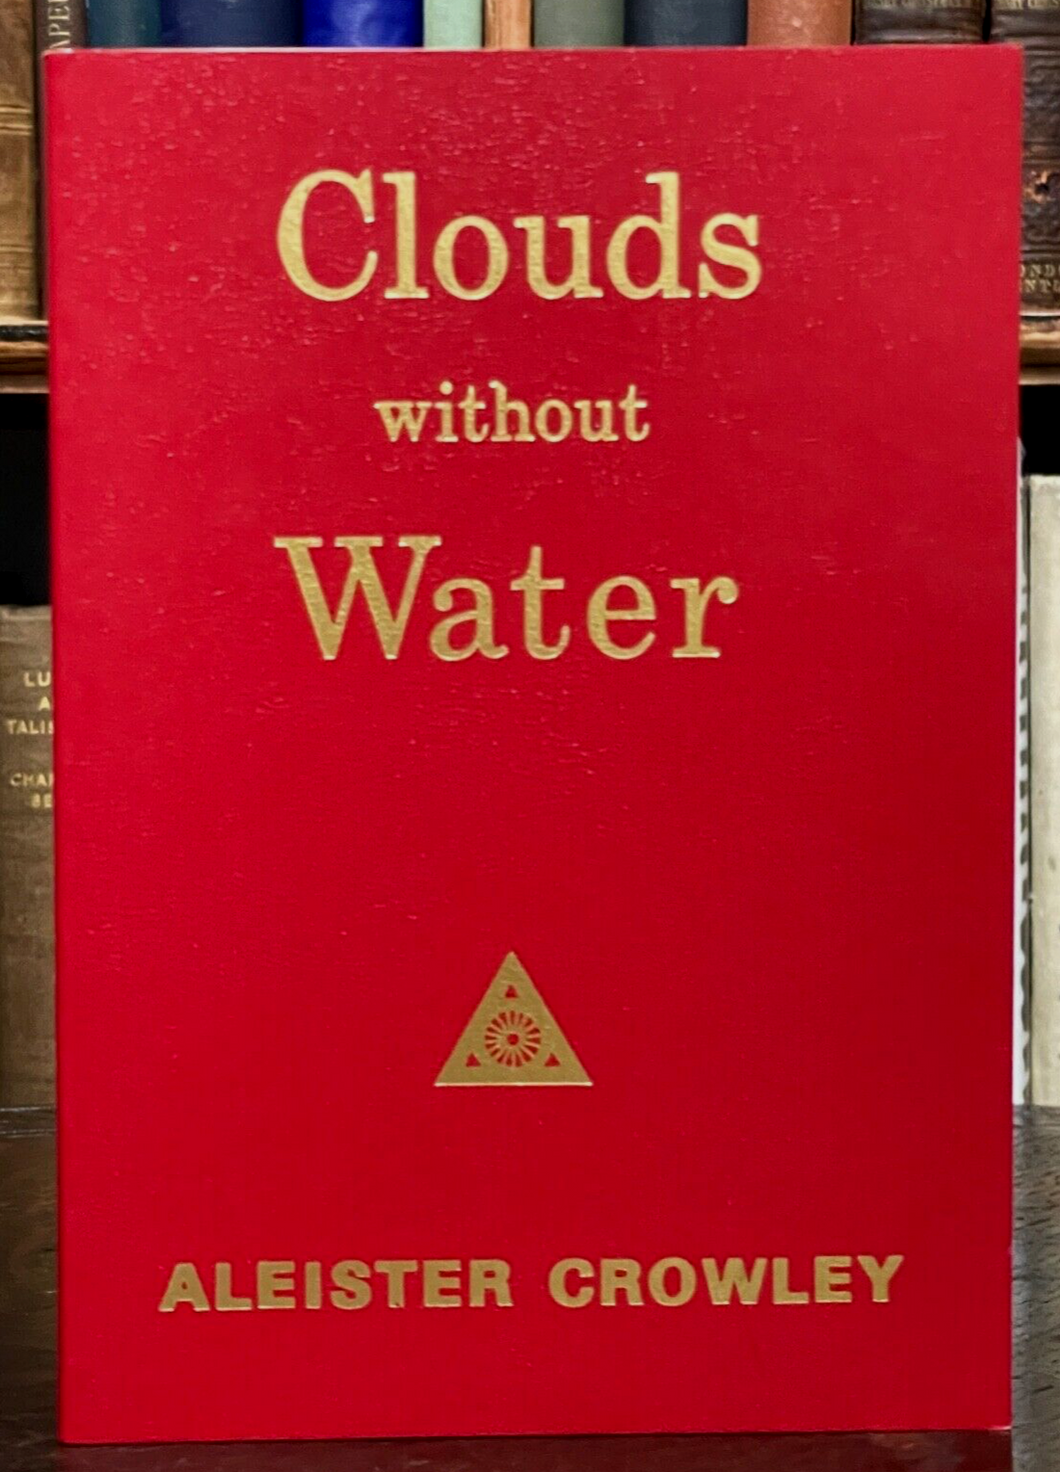 CLOUDS WITHOUT WATER - ALEISTER CROWLEY, 1973 - OCCULT POETRY THELEMA